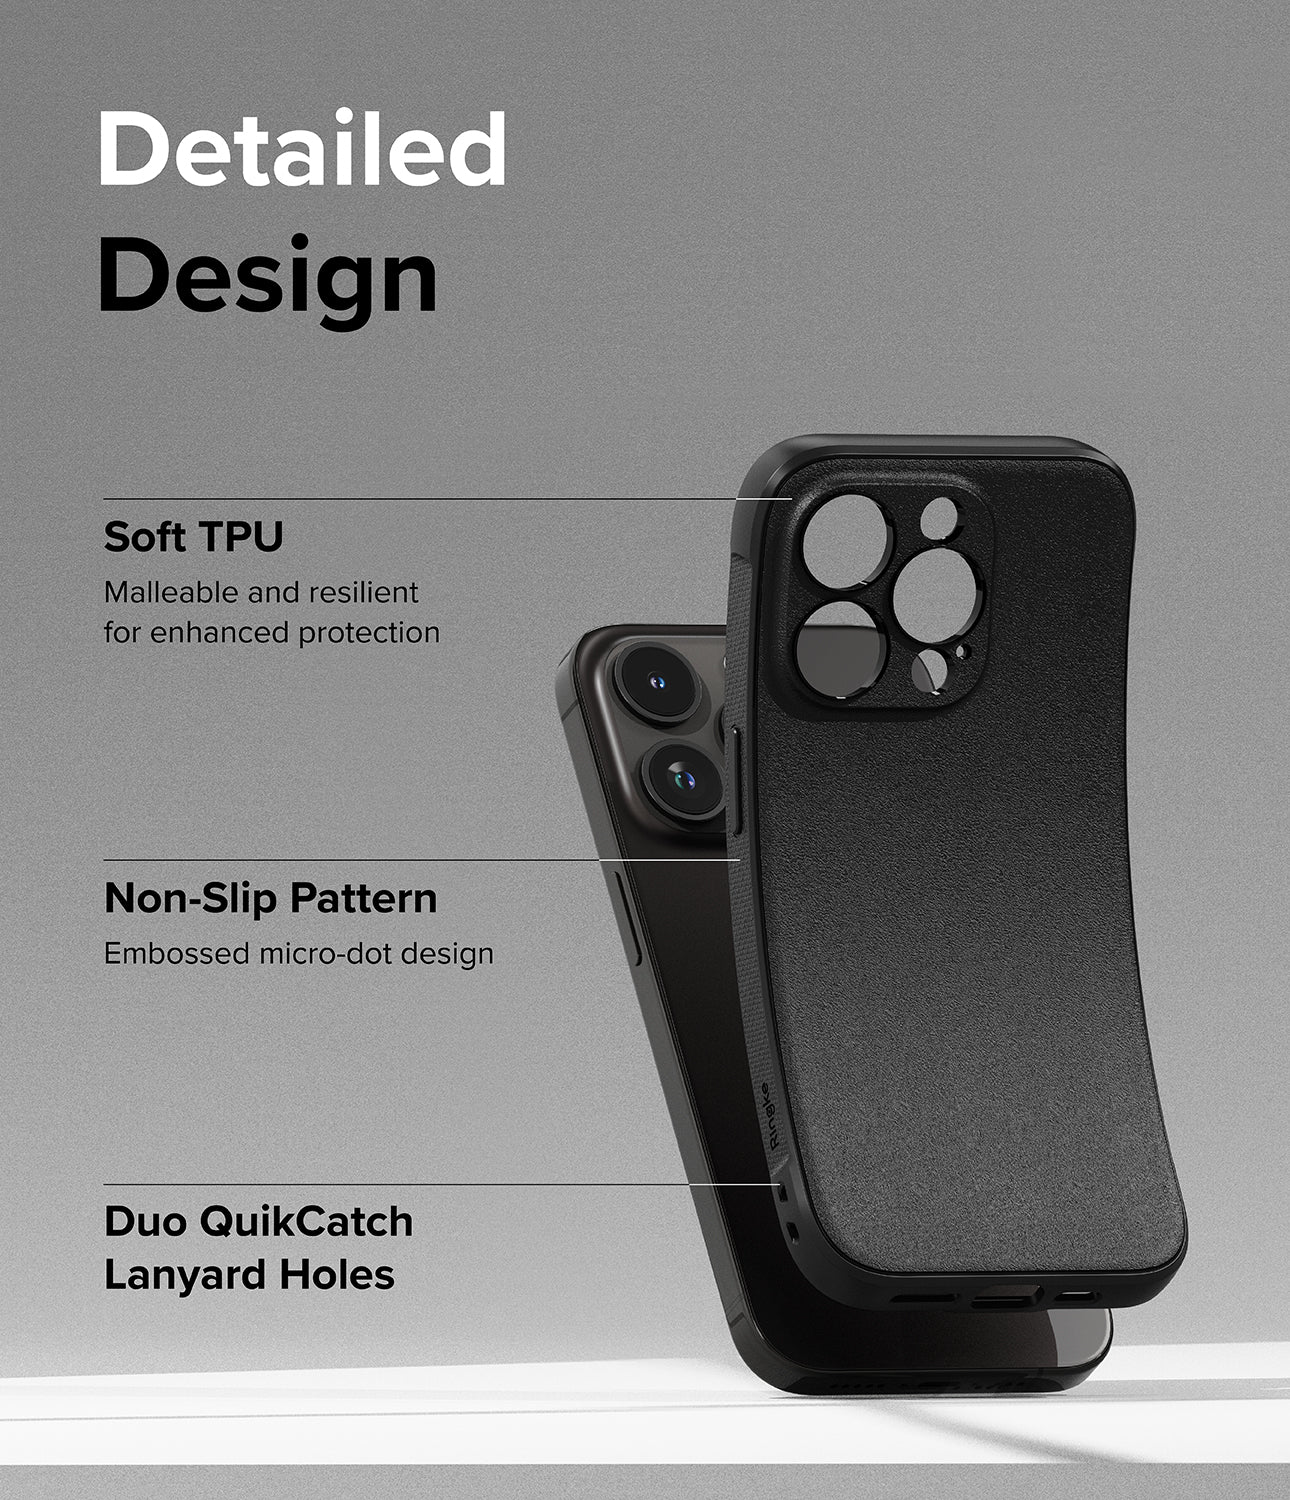 iPhone 15 Pro Max Case | Onyx - Black - Detailed Design. Malleable and resilient for enhanced protection with Soft TPU. Embossing micro-dot design with Non-Slip Pattern. Duo QuikCatch Lanyard Holes.